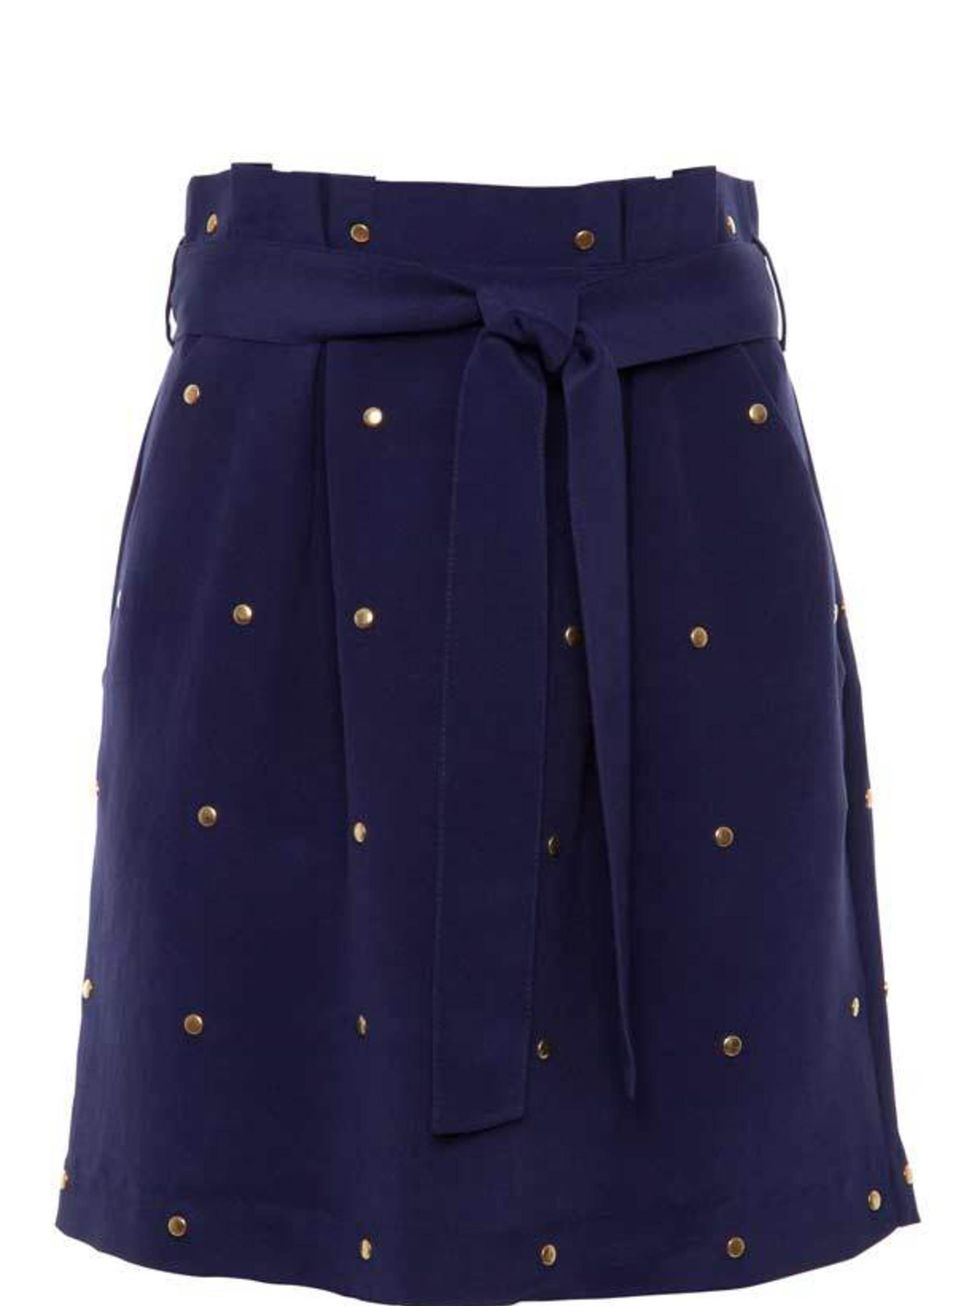 <p>We instantly fell for this studded skirt thanks to its cobalt blue silk and gold studding. A super pretty mini with just enough rocknroll edge. Alice by Temperley studded skirt, £165, at <a href="http://shop.harveynichols.com/fcp/product/-/Skirts/Wil